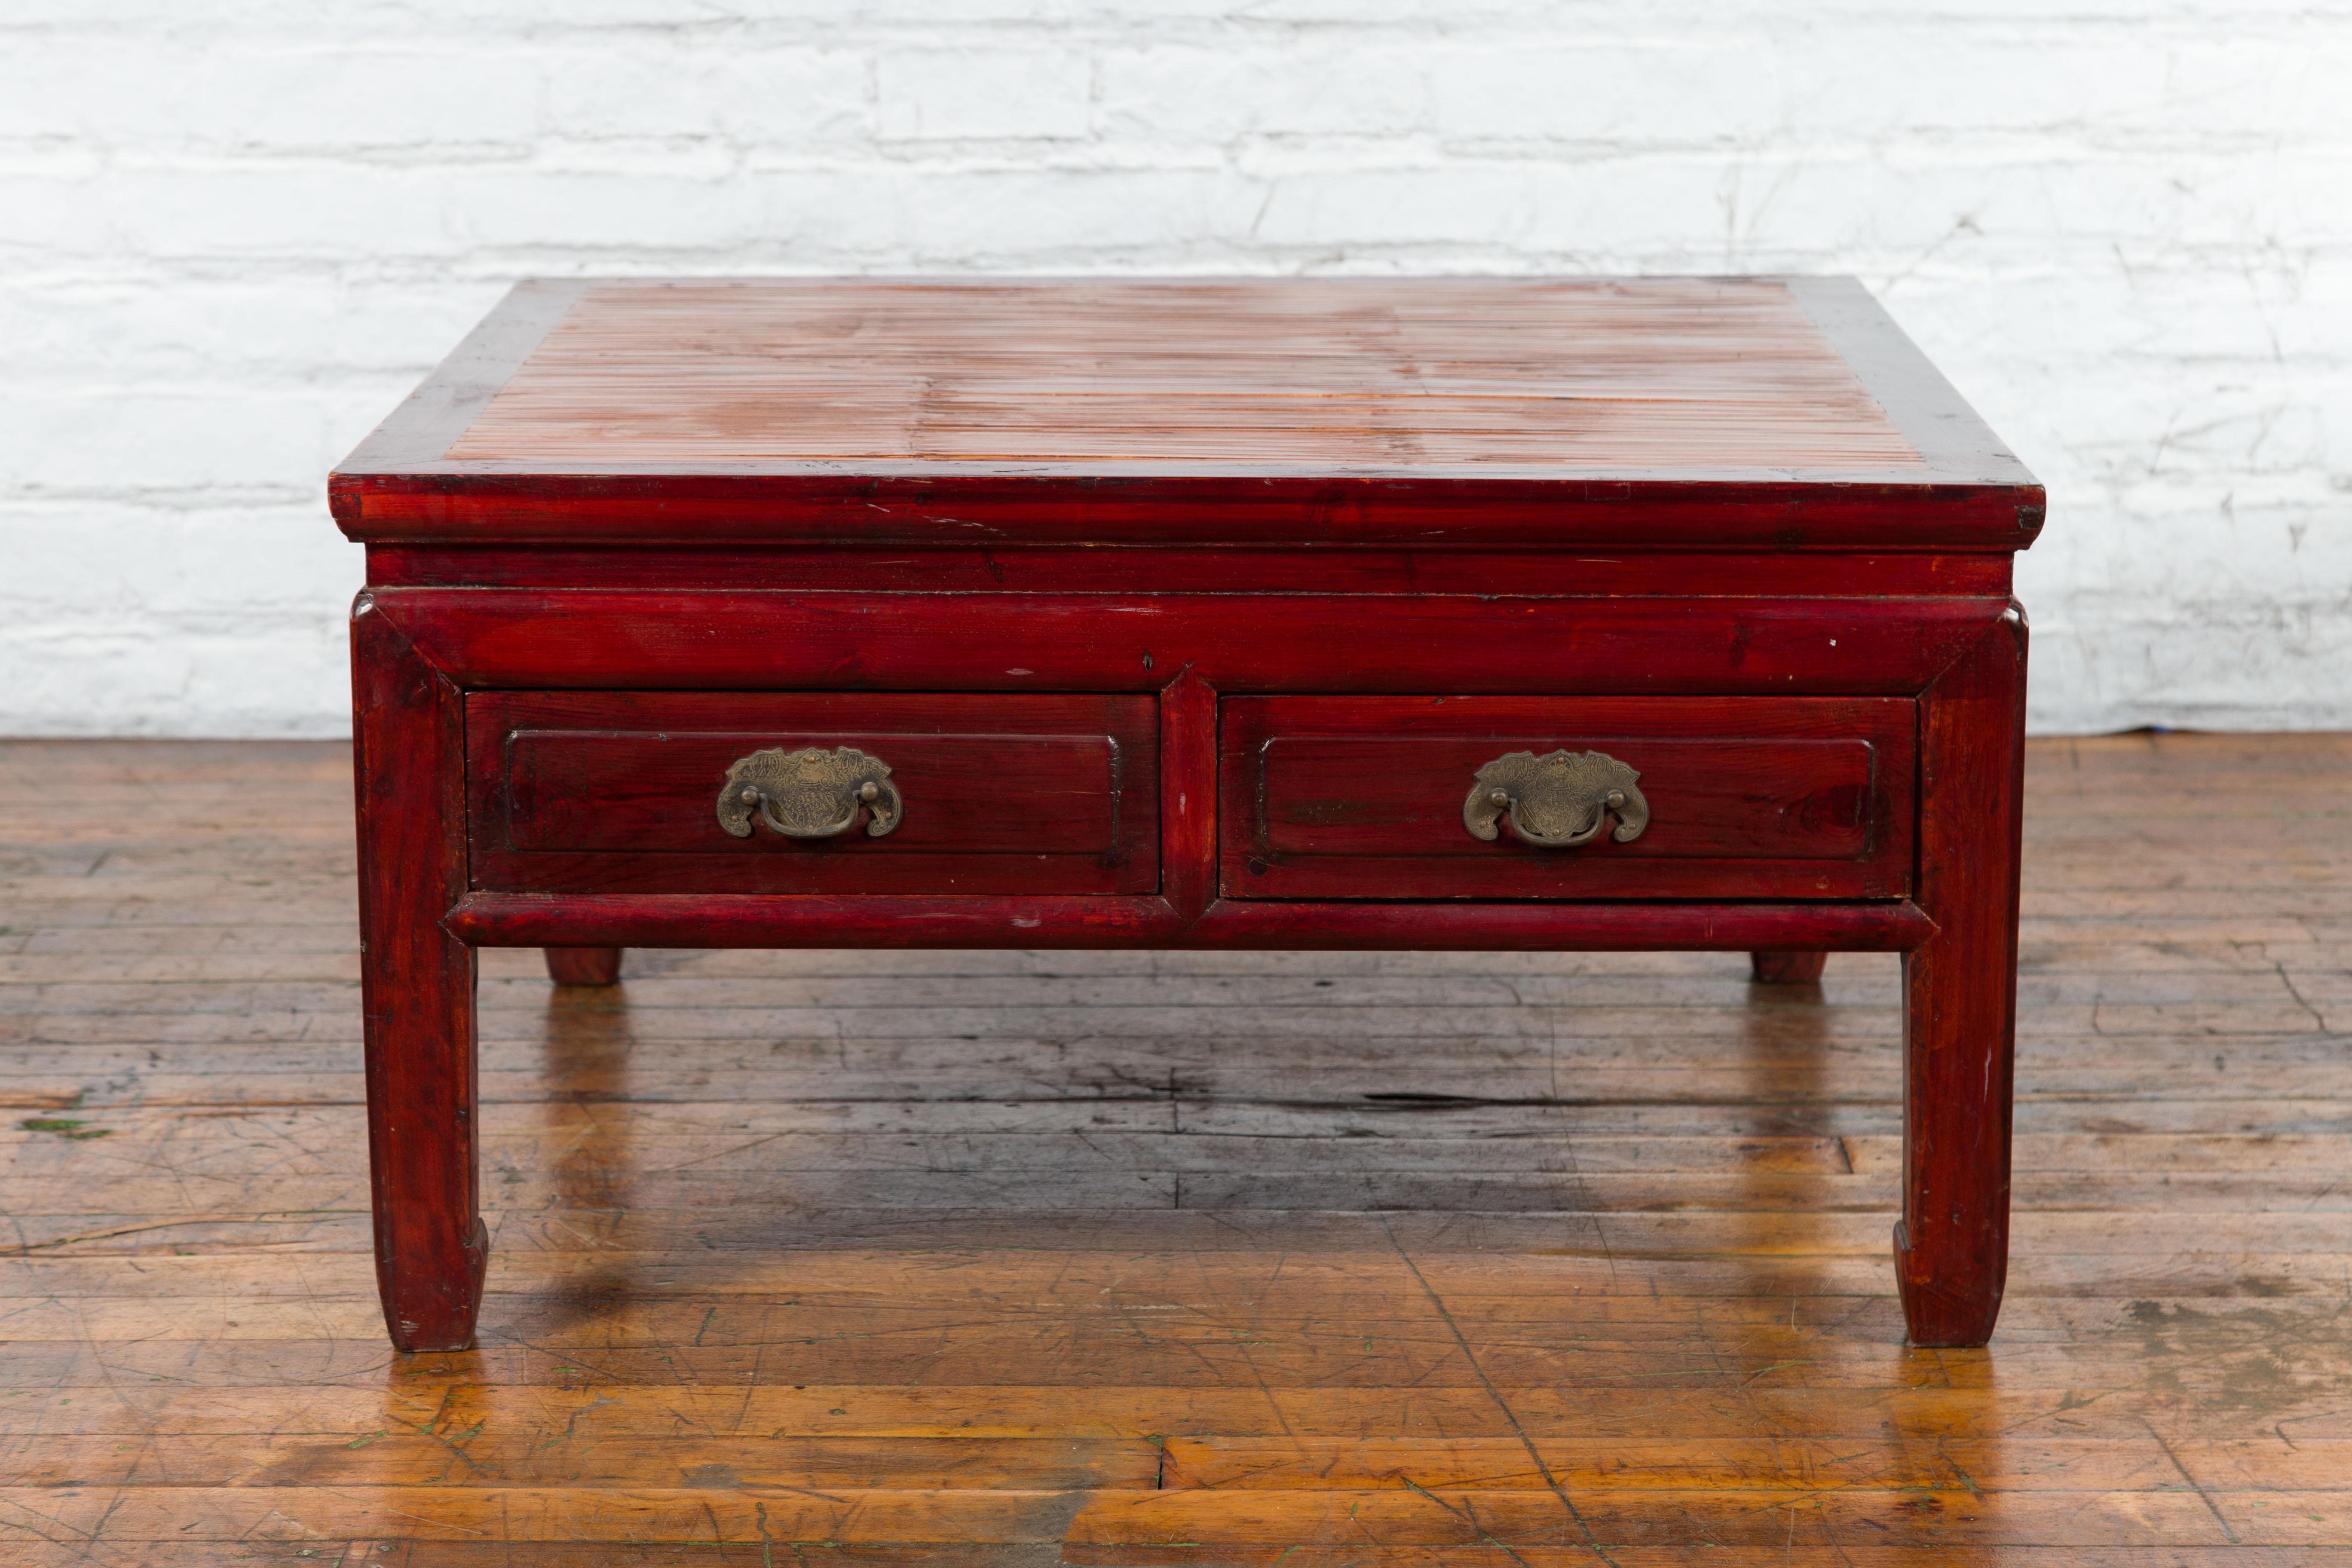 A Chinese coffee table from the early 20th century with bamboo top and long drawers. Created in China during the early years of the 20th century, this dark red lacquered coffee table features a square bamboo top sitting above two long drawers fitted